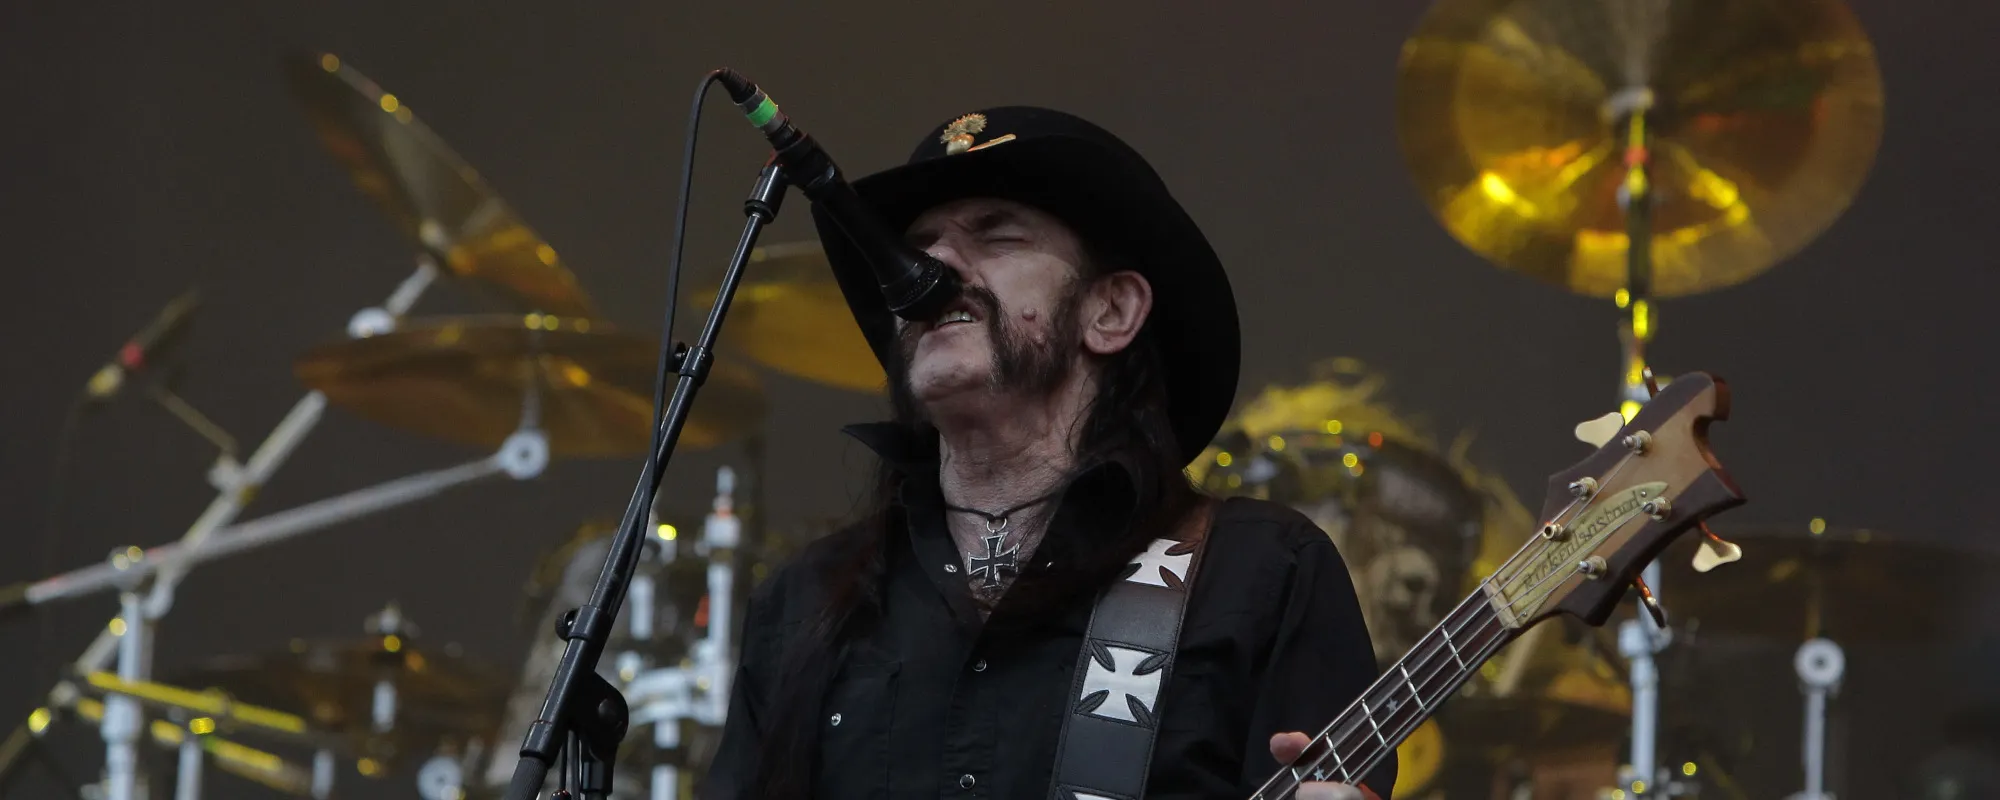 Behind the Album: The Tension and Strain that Plagued ‘Iron Fist’ by Motörhead